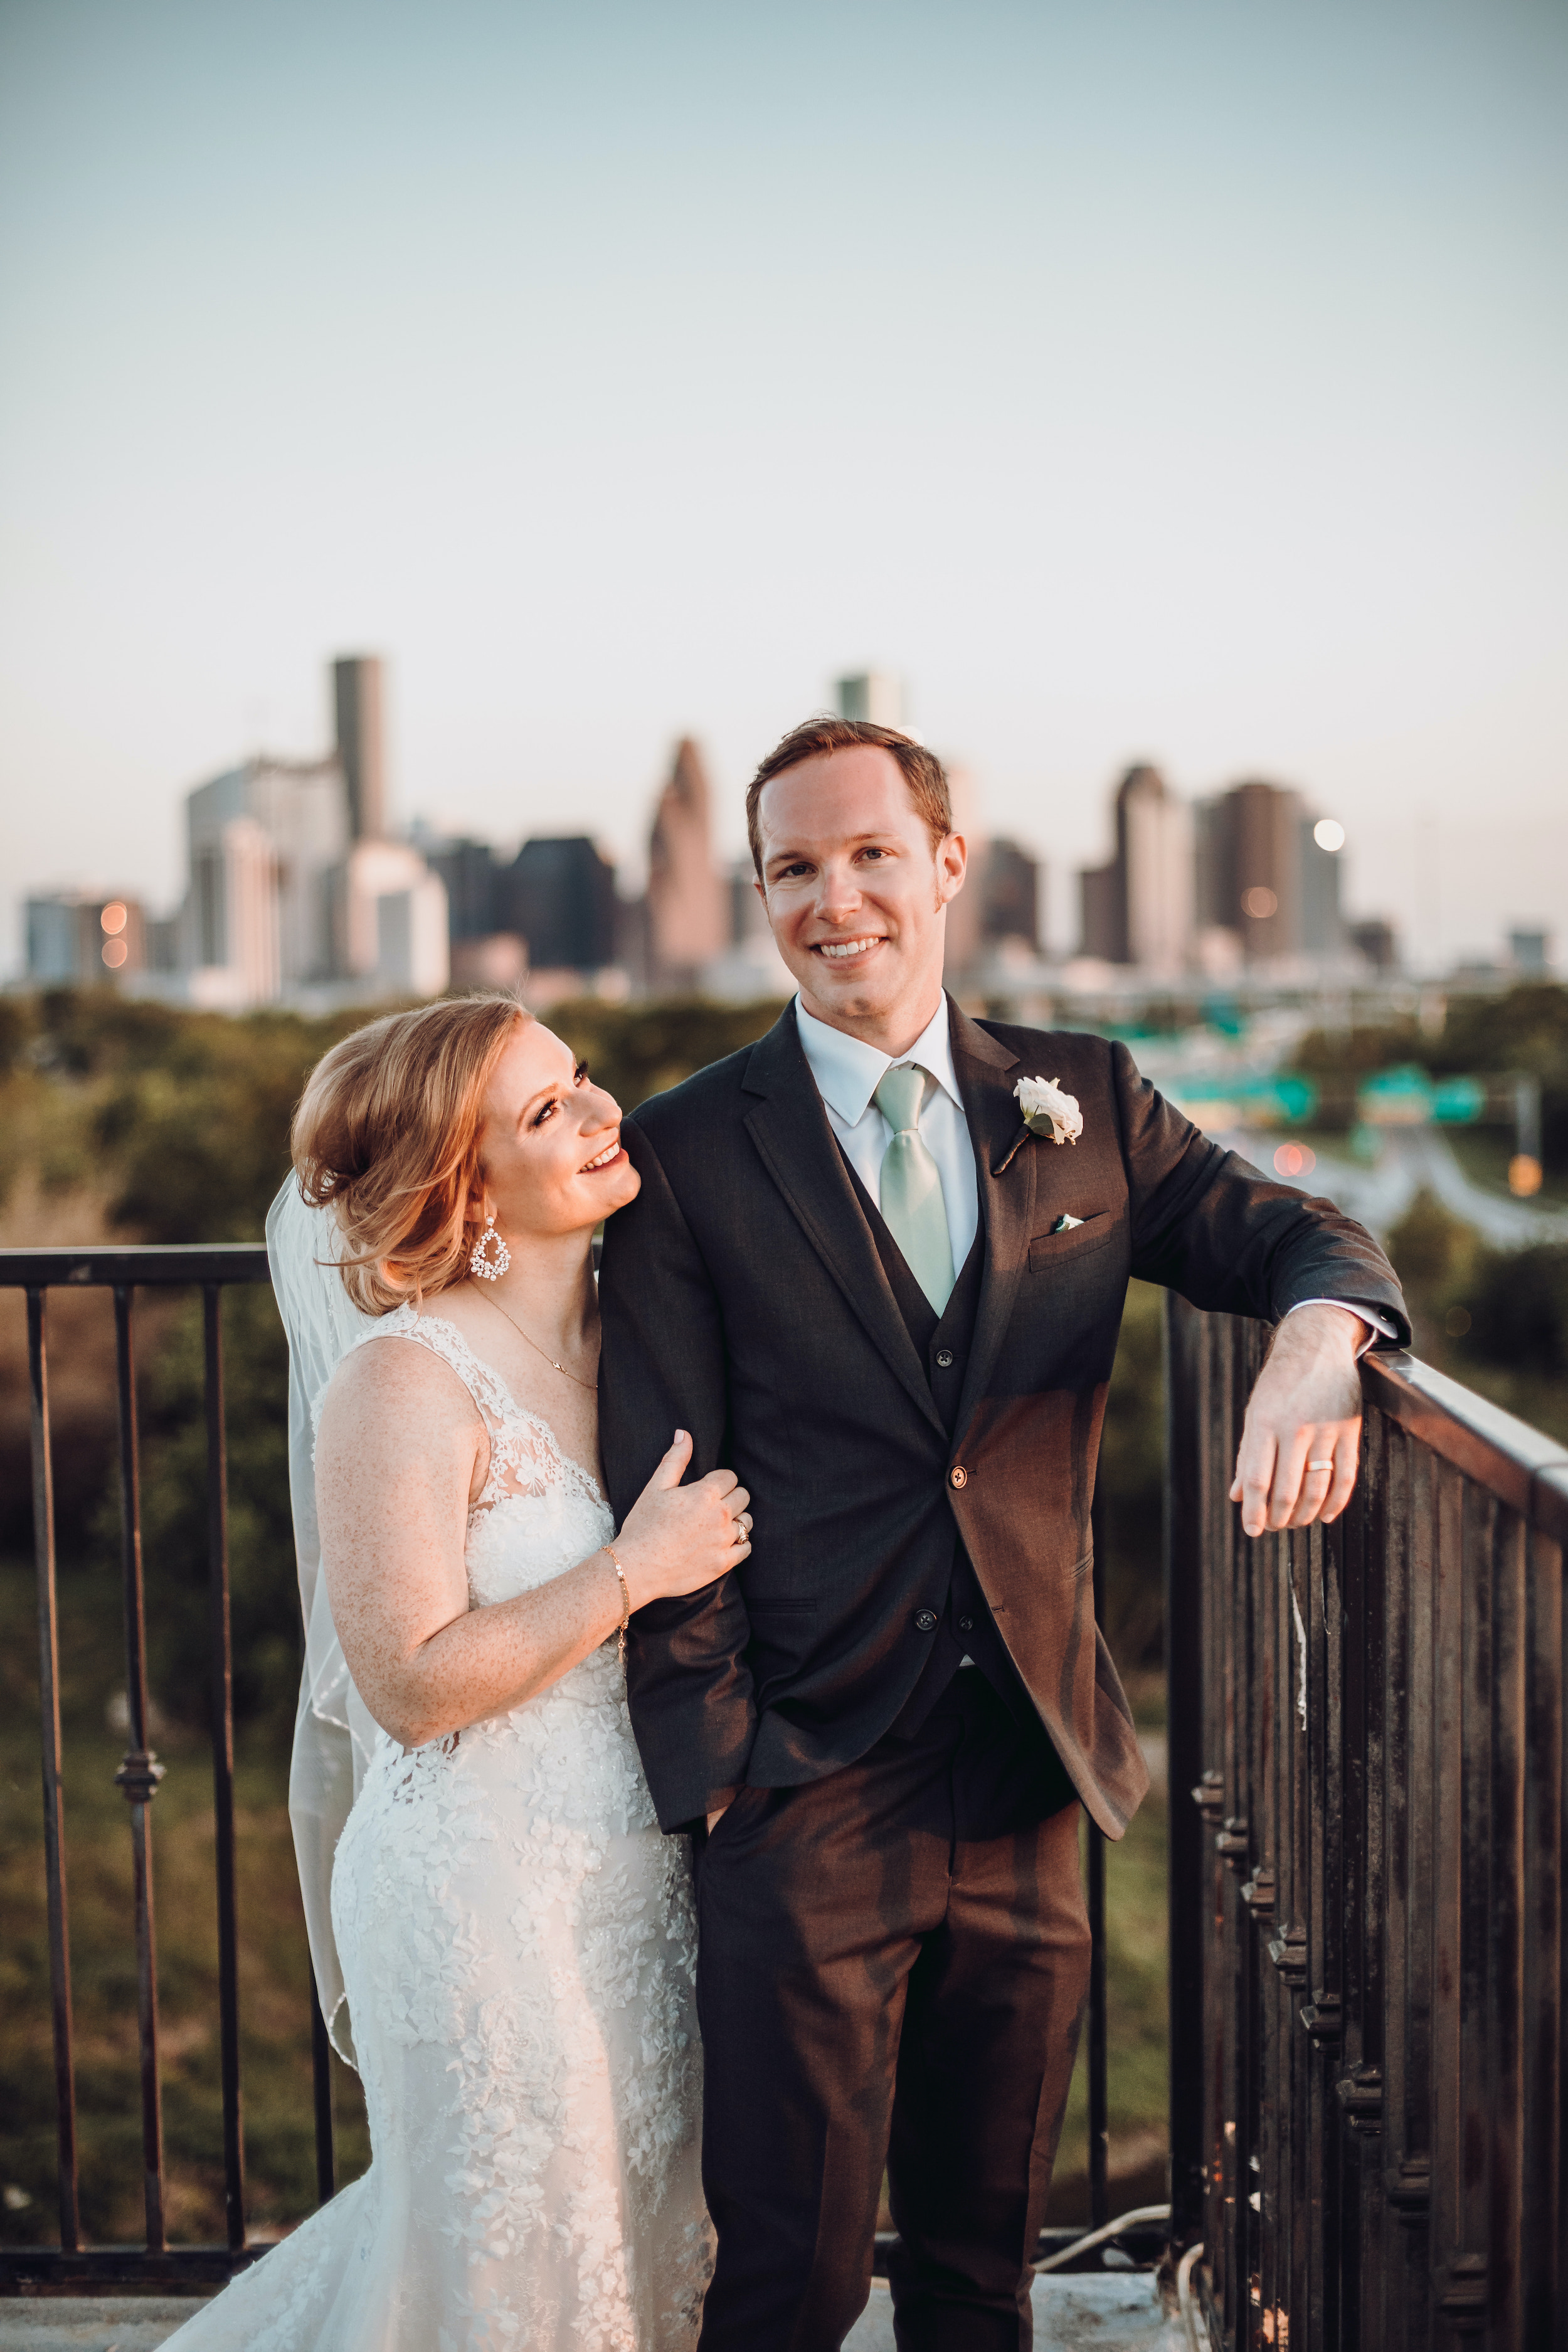 A bride and groom smile and pose on a balcony overlooking the Houston skyline.